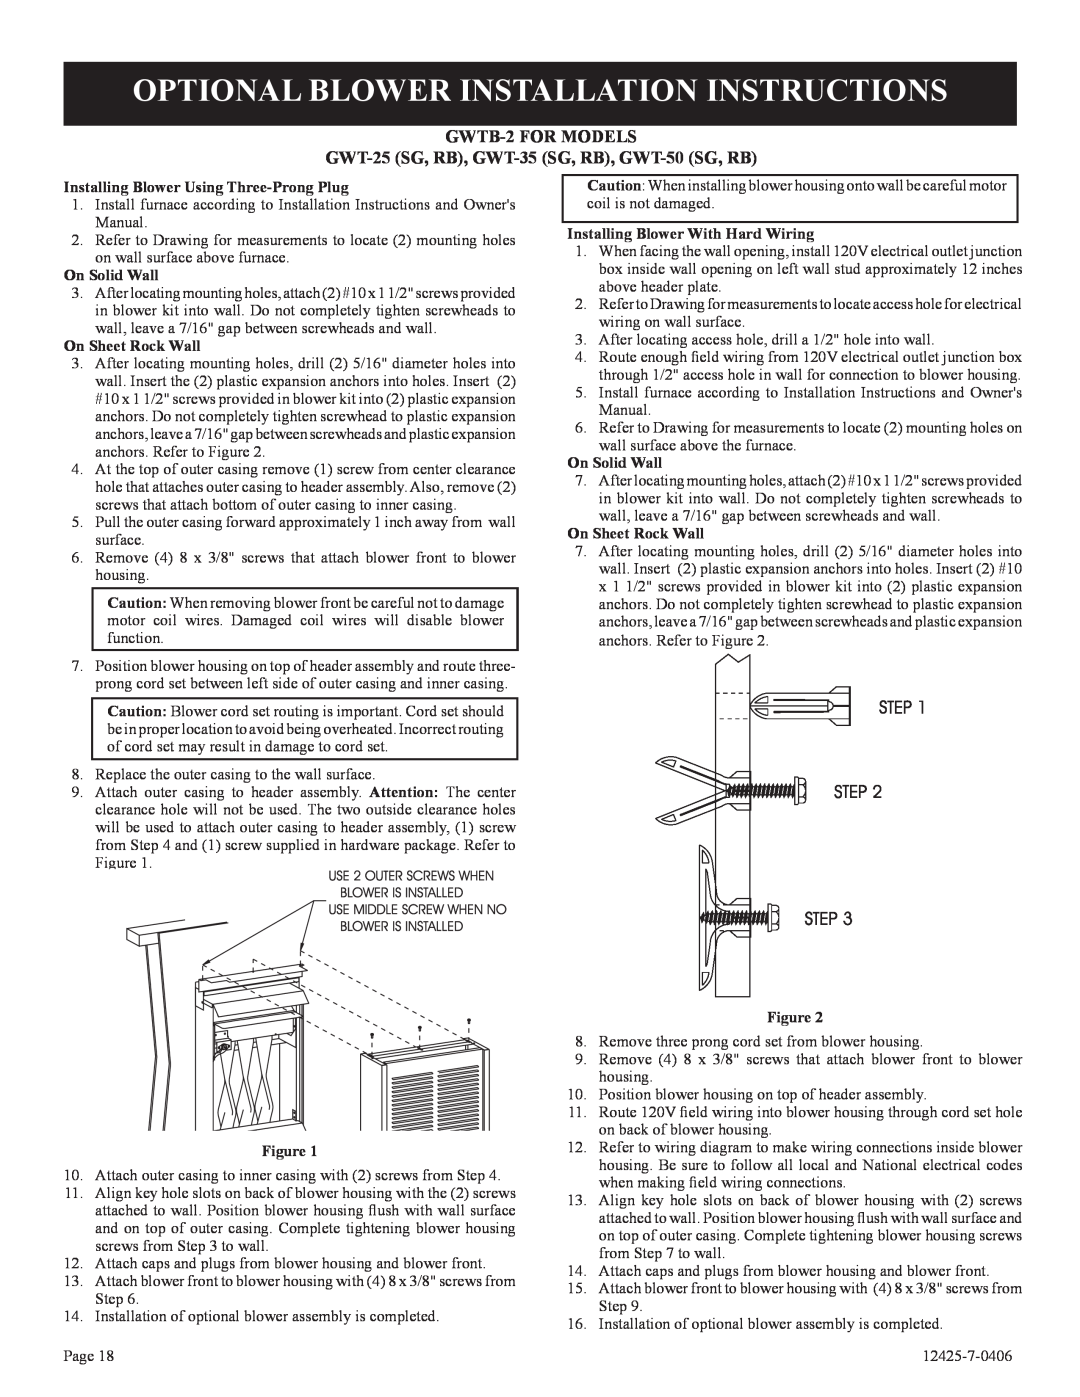 Empire Products GWT-35-2 Optional Blower Installation Instructions, Installing Blower Using Three-ProngPlug, On Solid Wall 